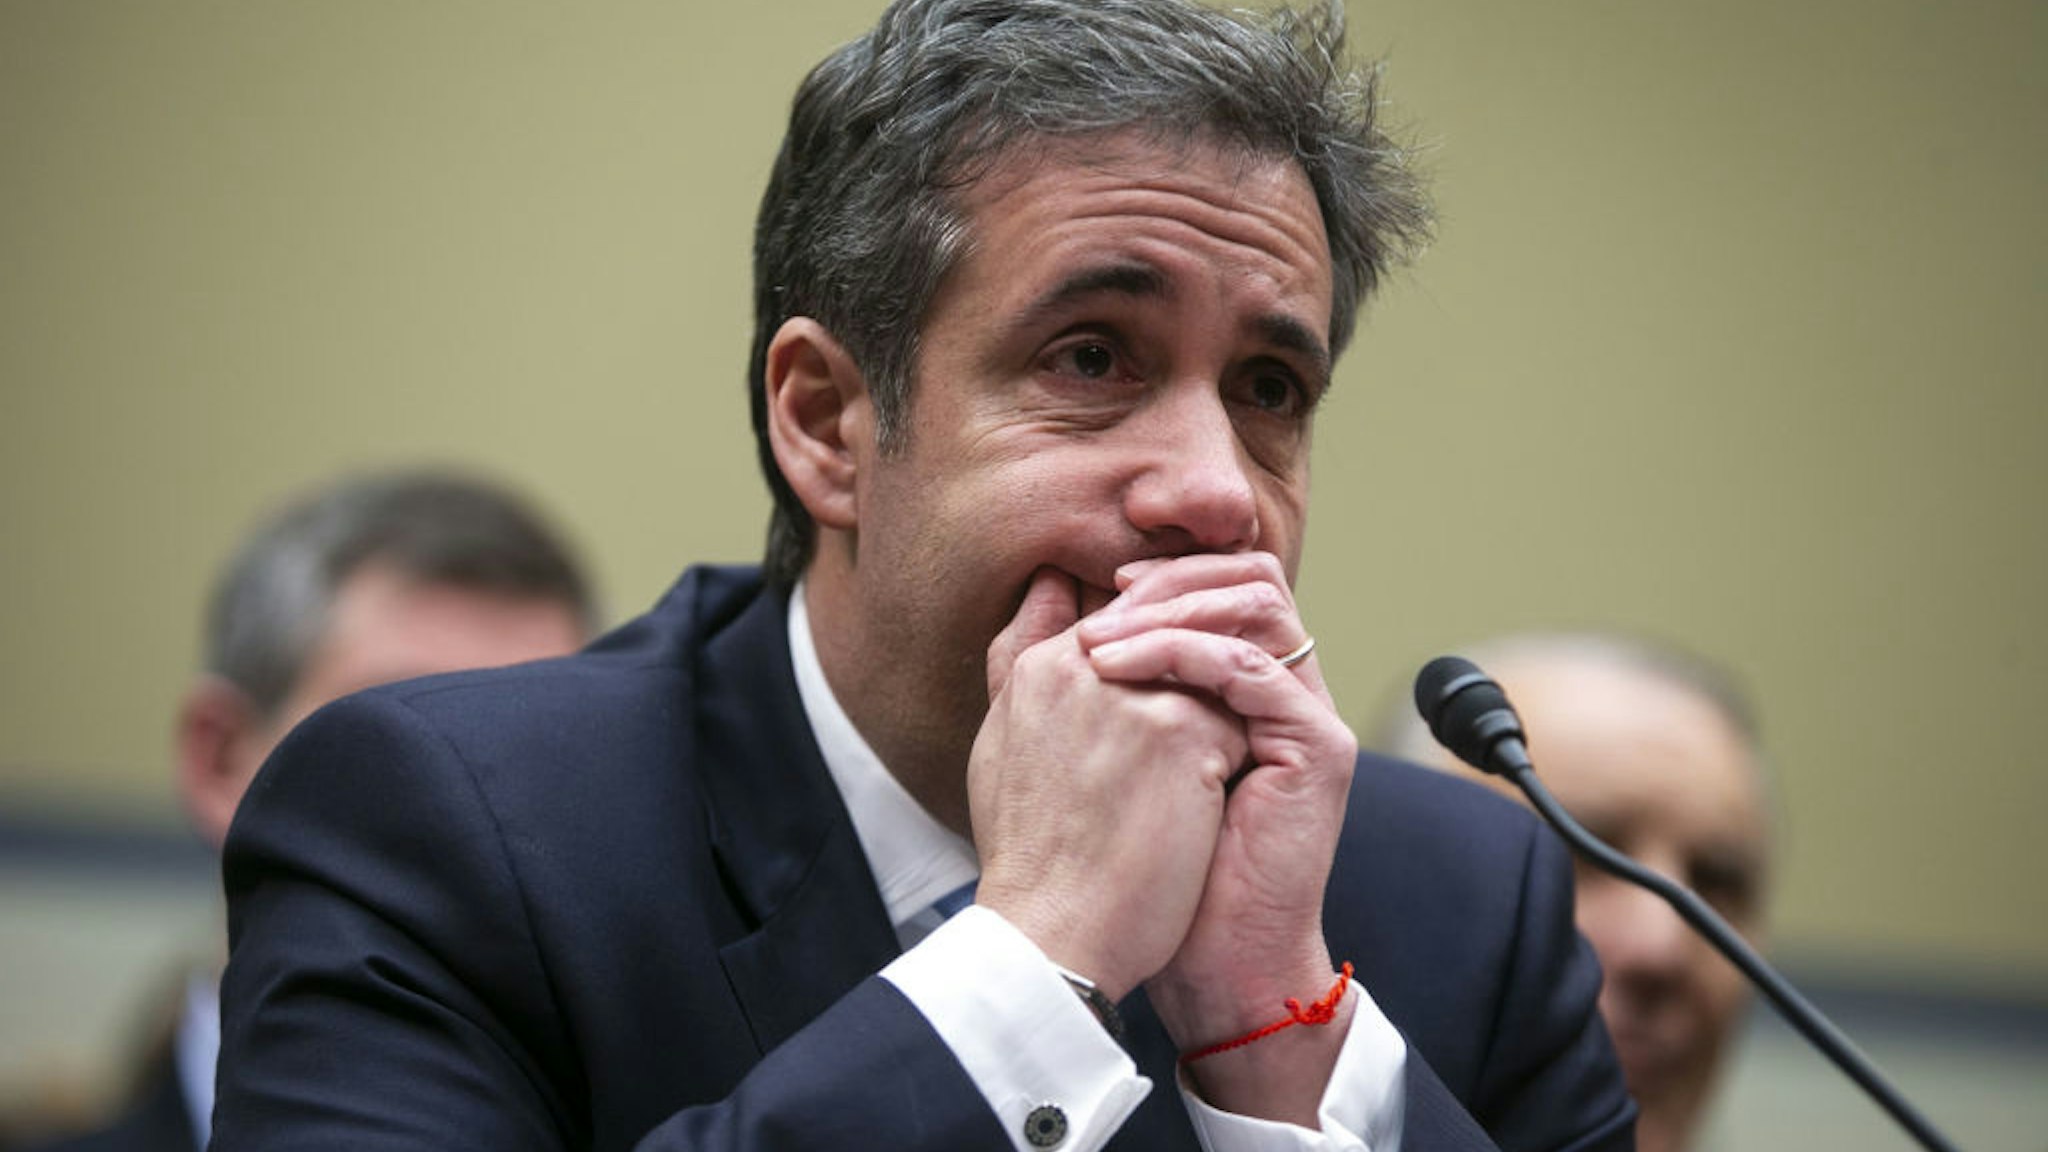 Michael Cohen, former personal lawyer to U.S. President Donald Trump, listens to closing statements during a House Oversight Committee hearing in Washington, D.C., U.S., on Wednesday, Feb. 27, 2019.